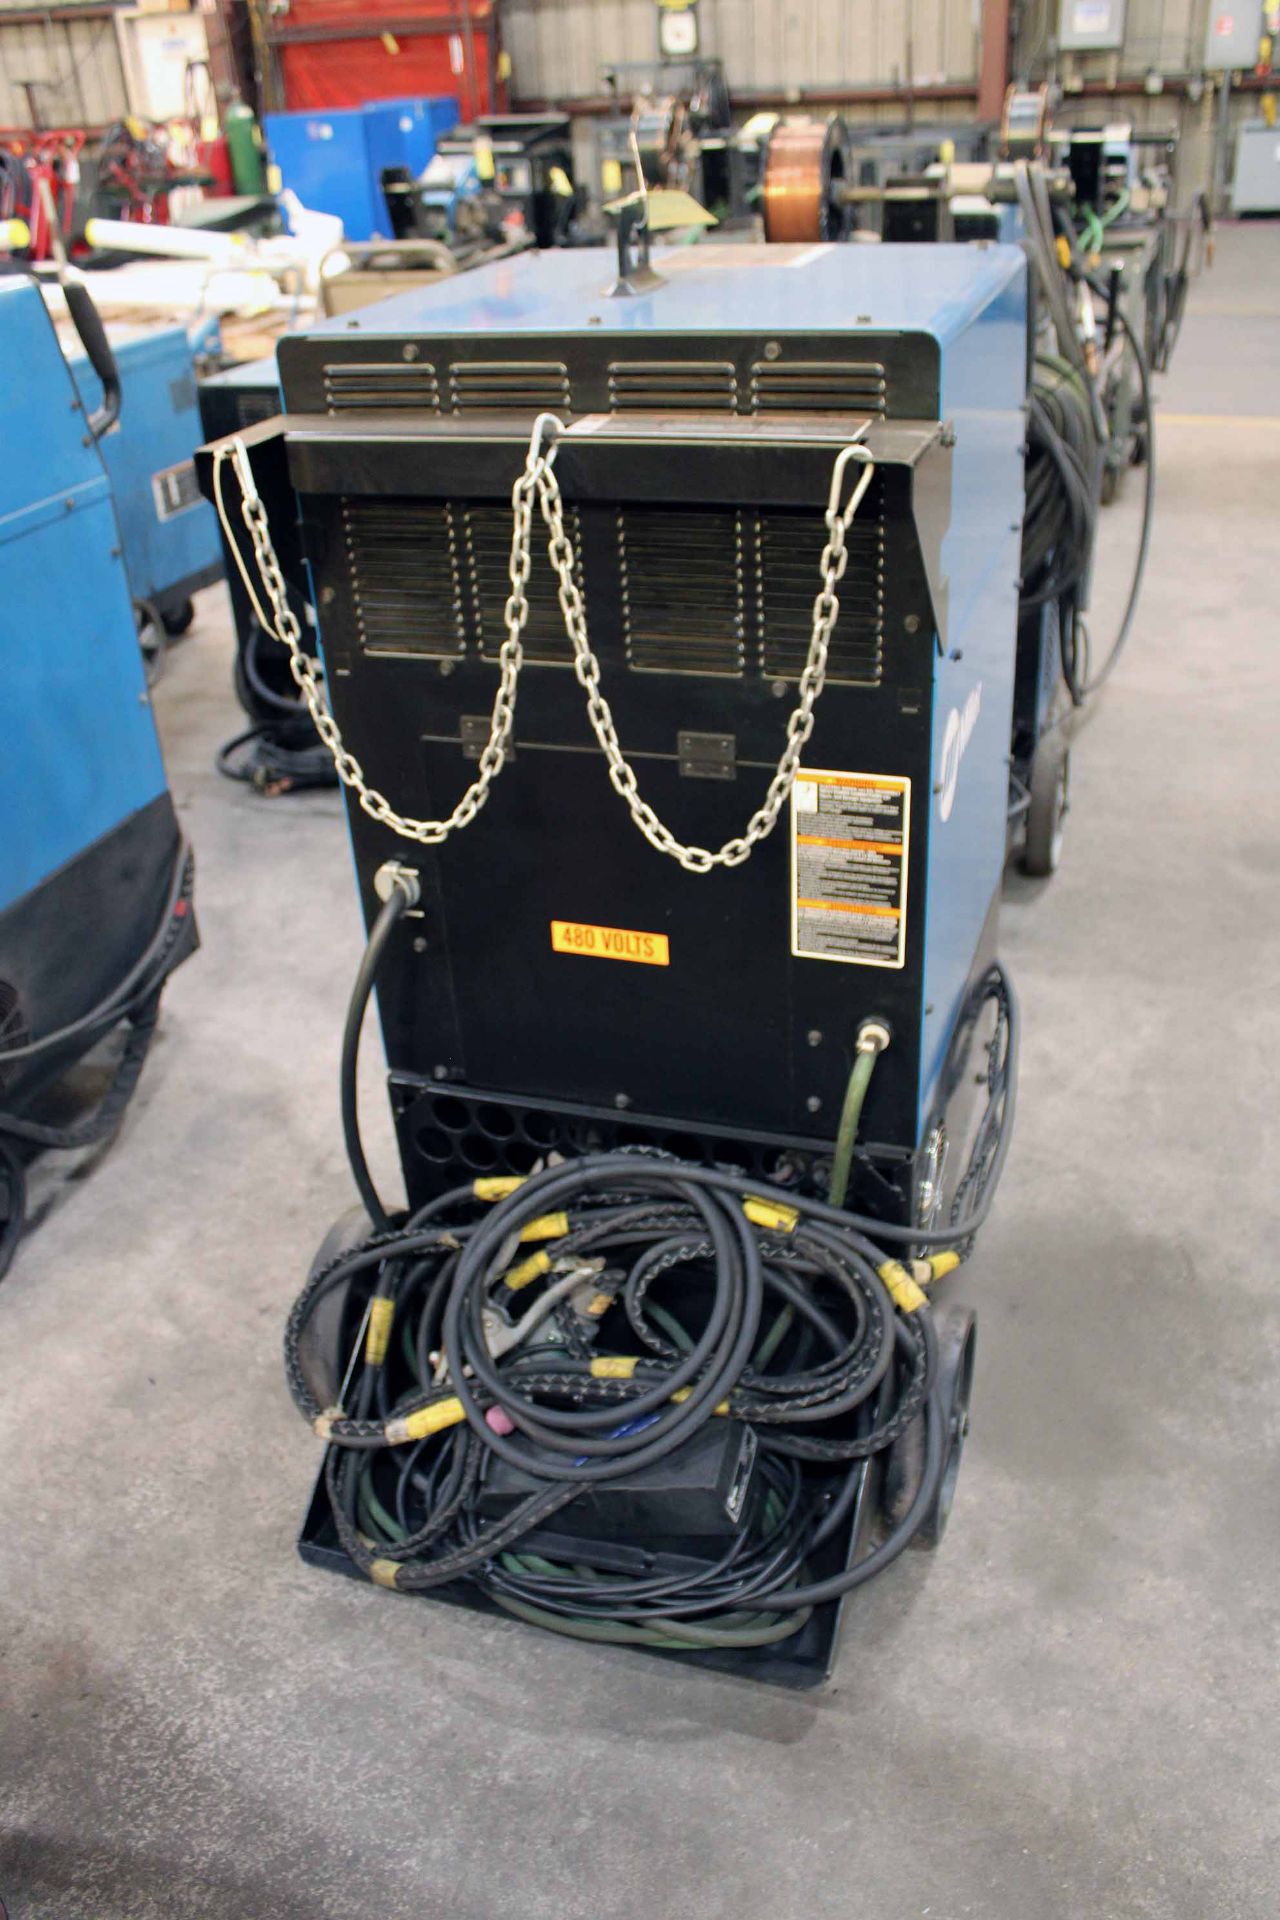 WELDING MACHINE, MILLER SYNCROWAVE MDL. 350 LX, new 2019, S/N MK060824L (Located at: Emco Wheaton - Image 3 of 4